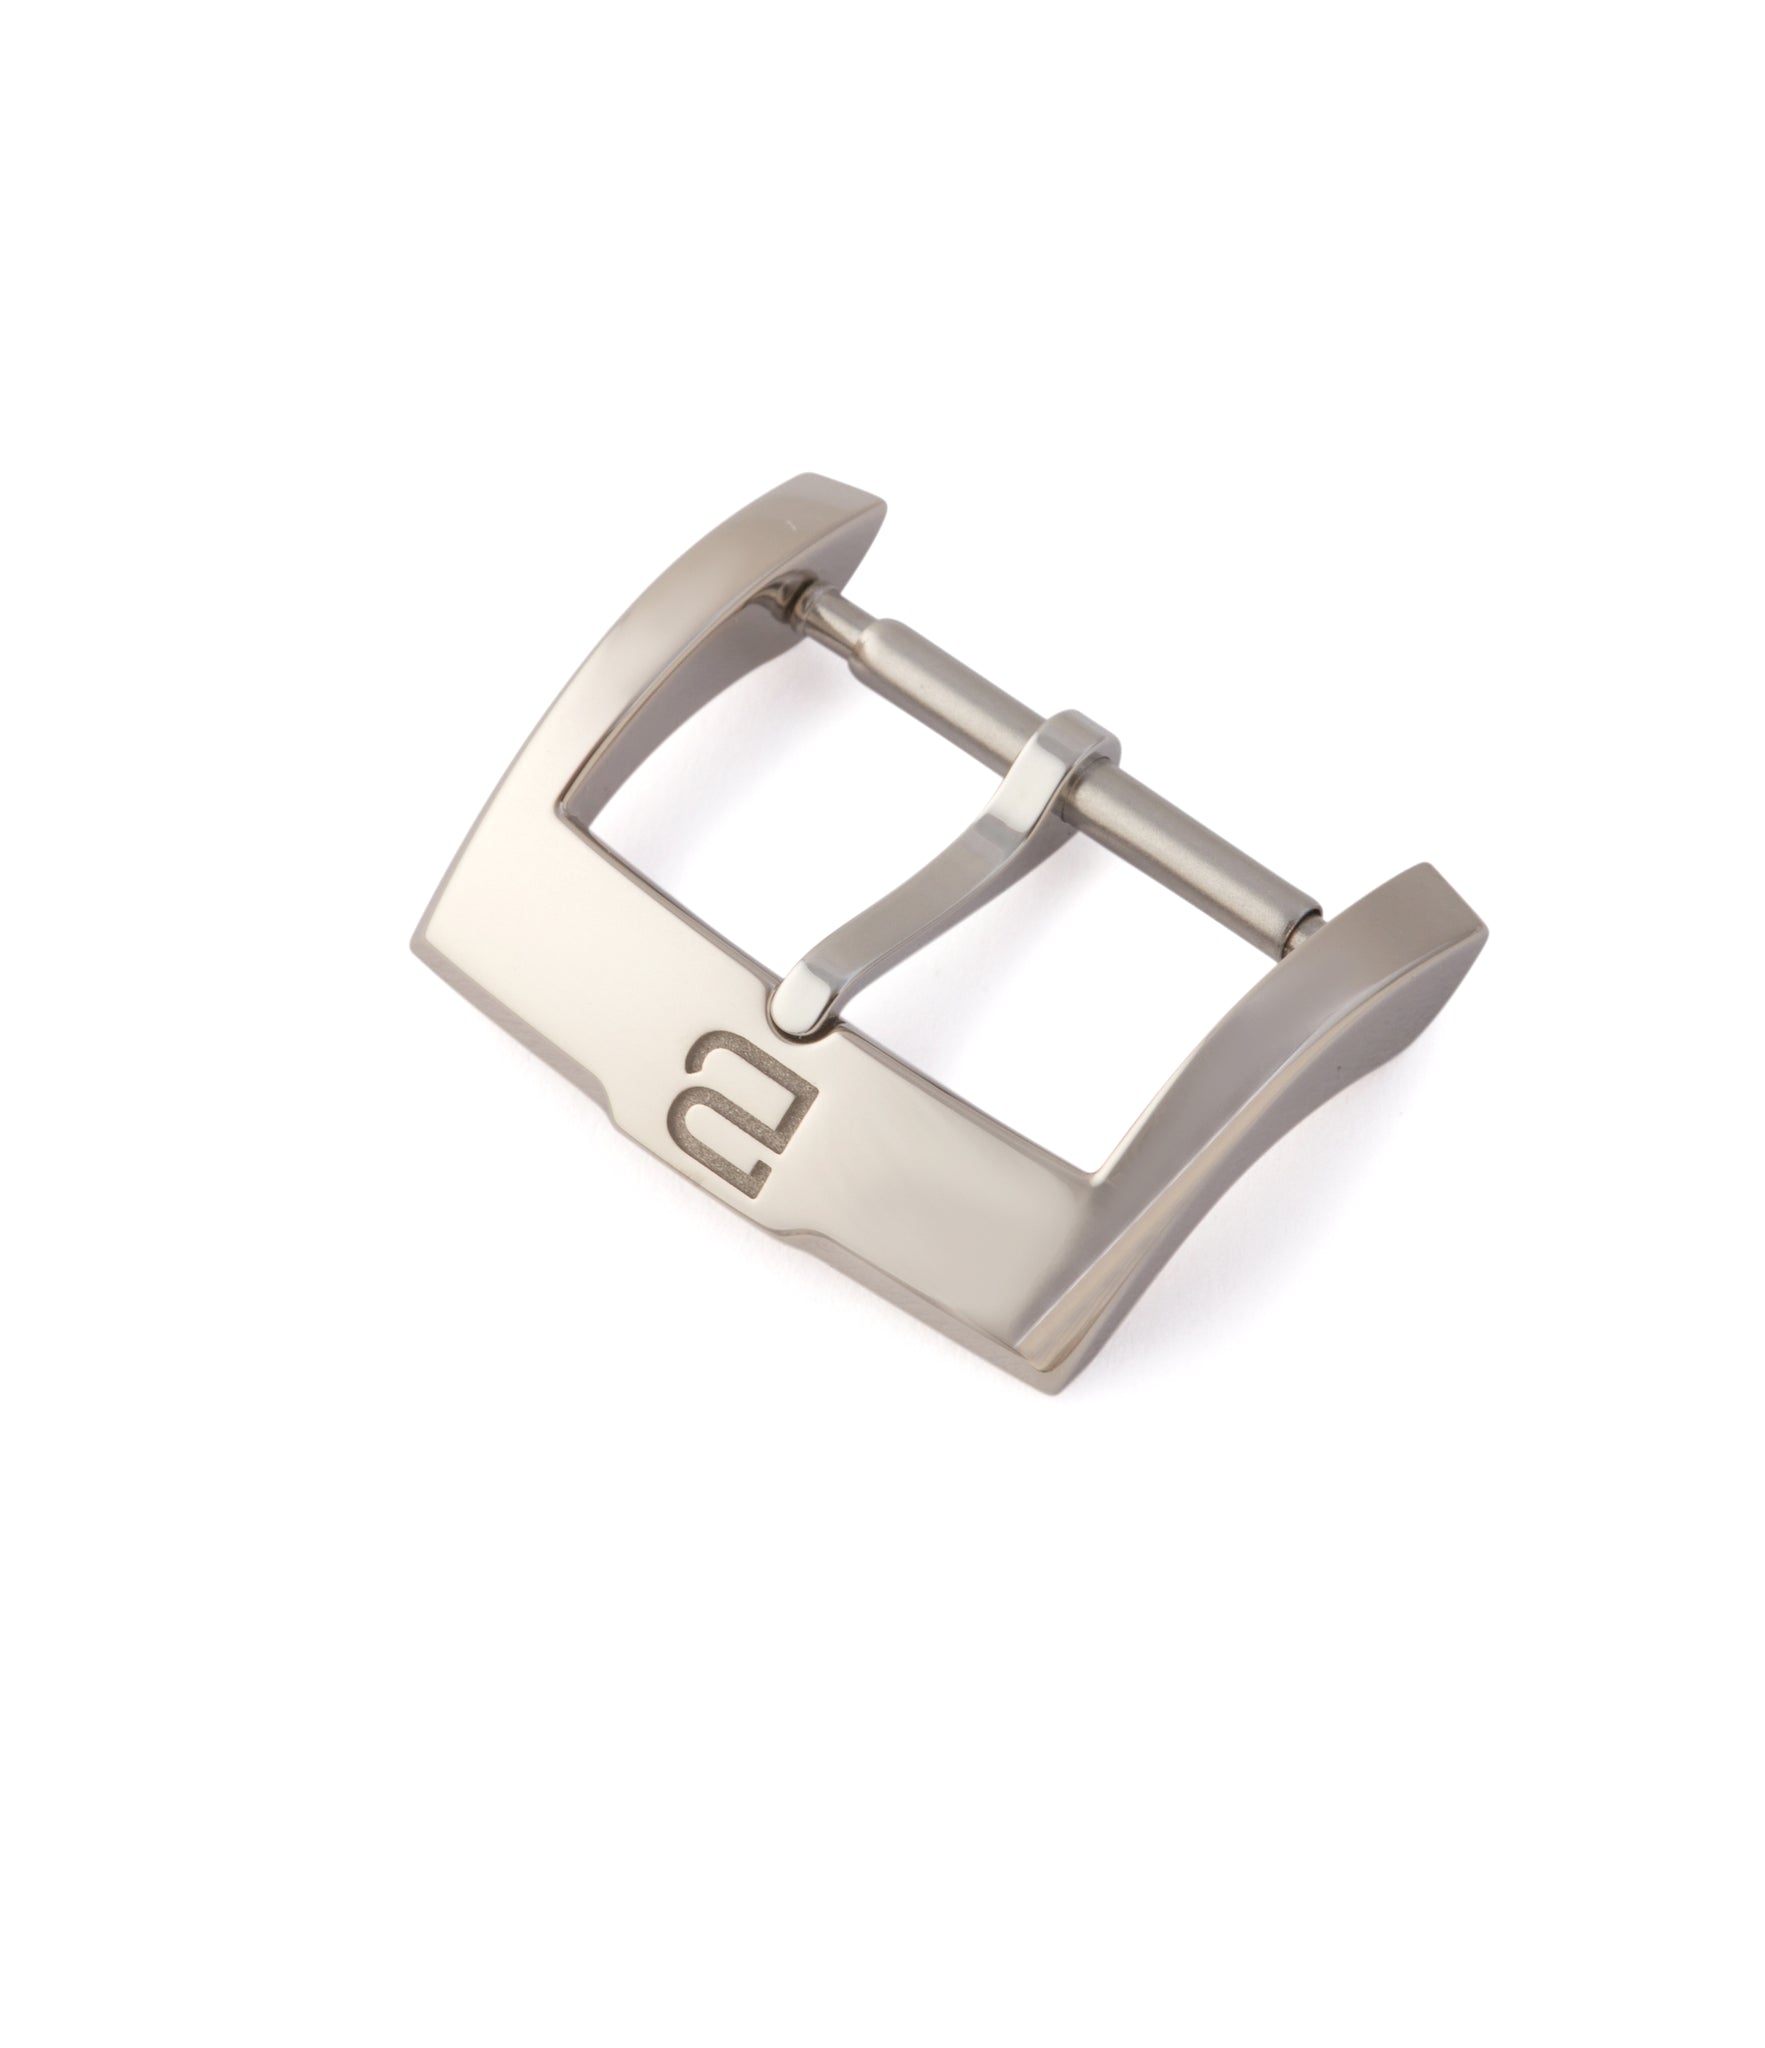 white gold tang buckle Petermann Bédat 1967 Deadbeat Seconds white gold time-only watch independent watchmakers order official retailer A Collected Man London